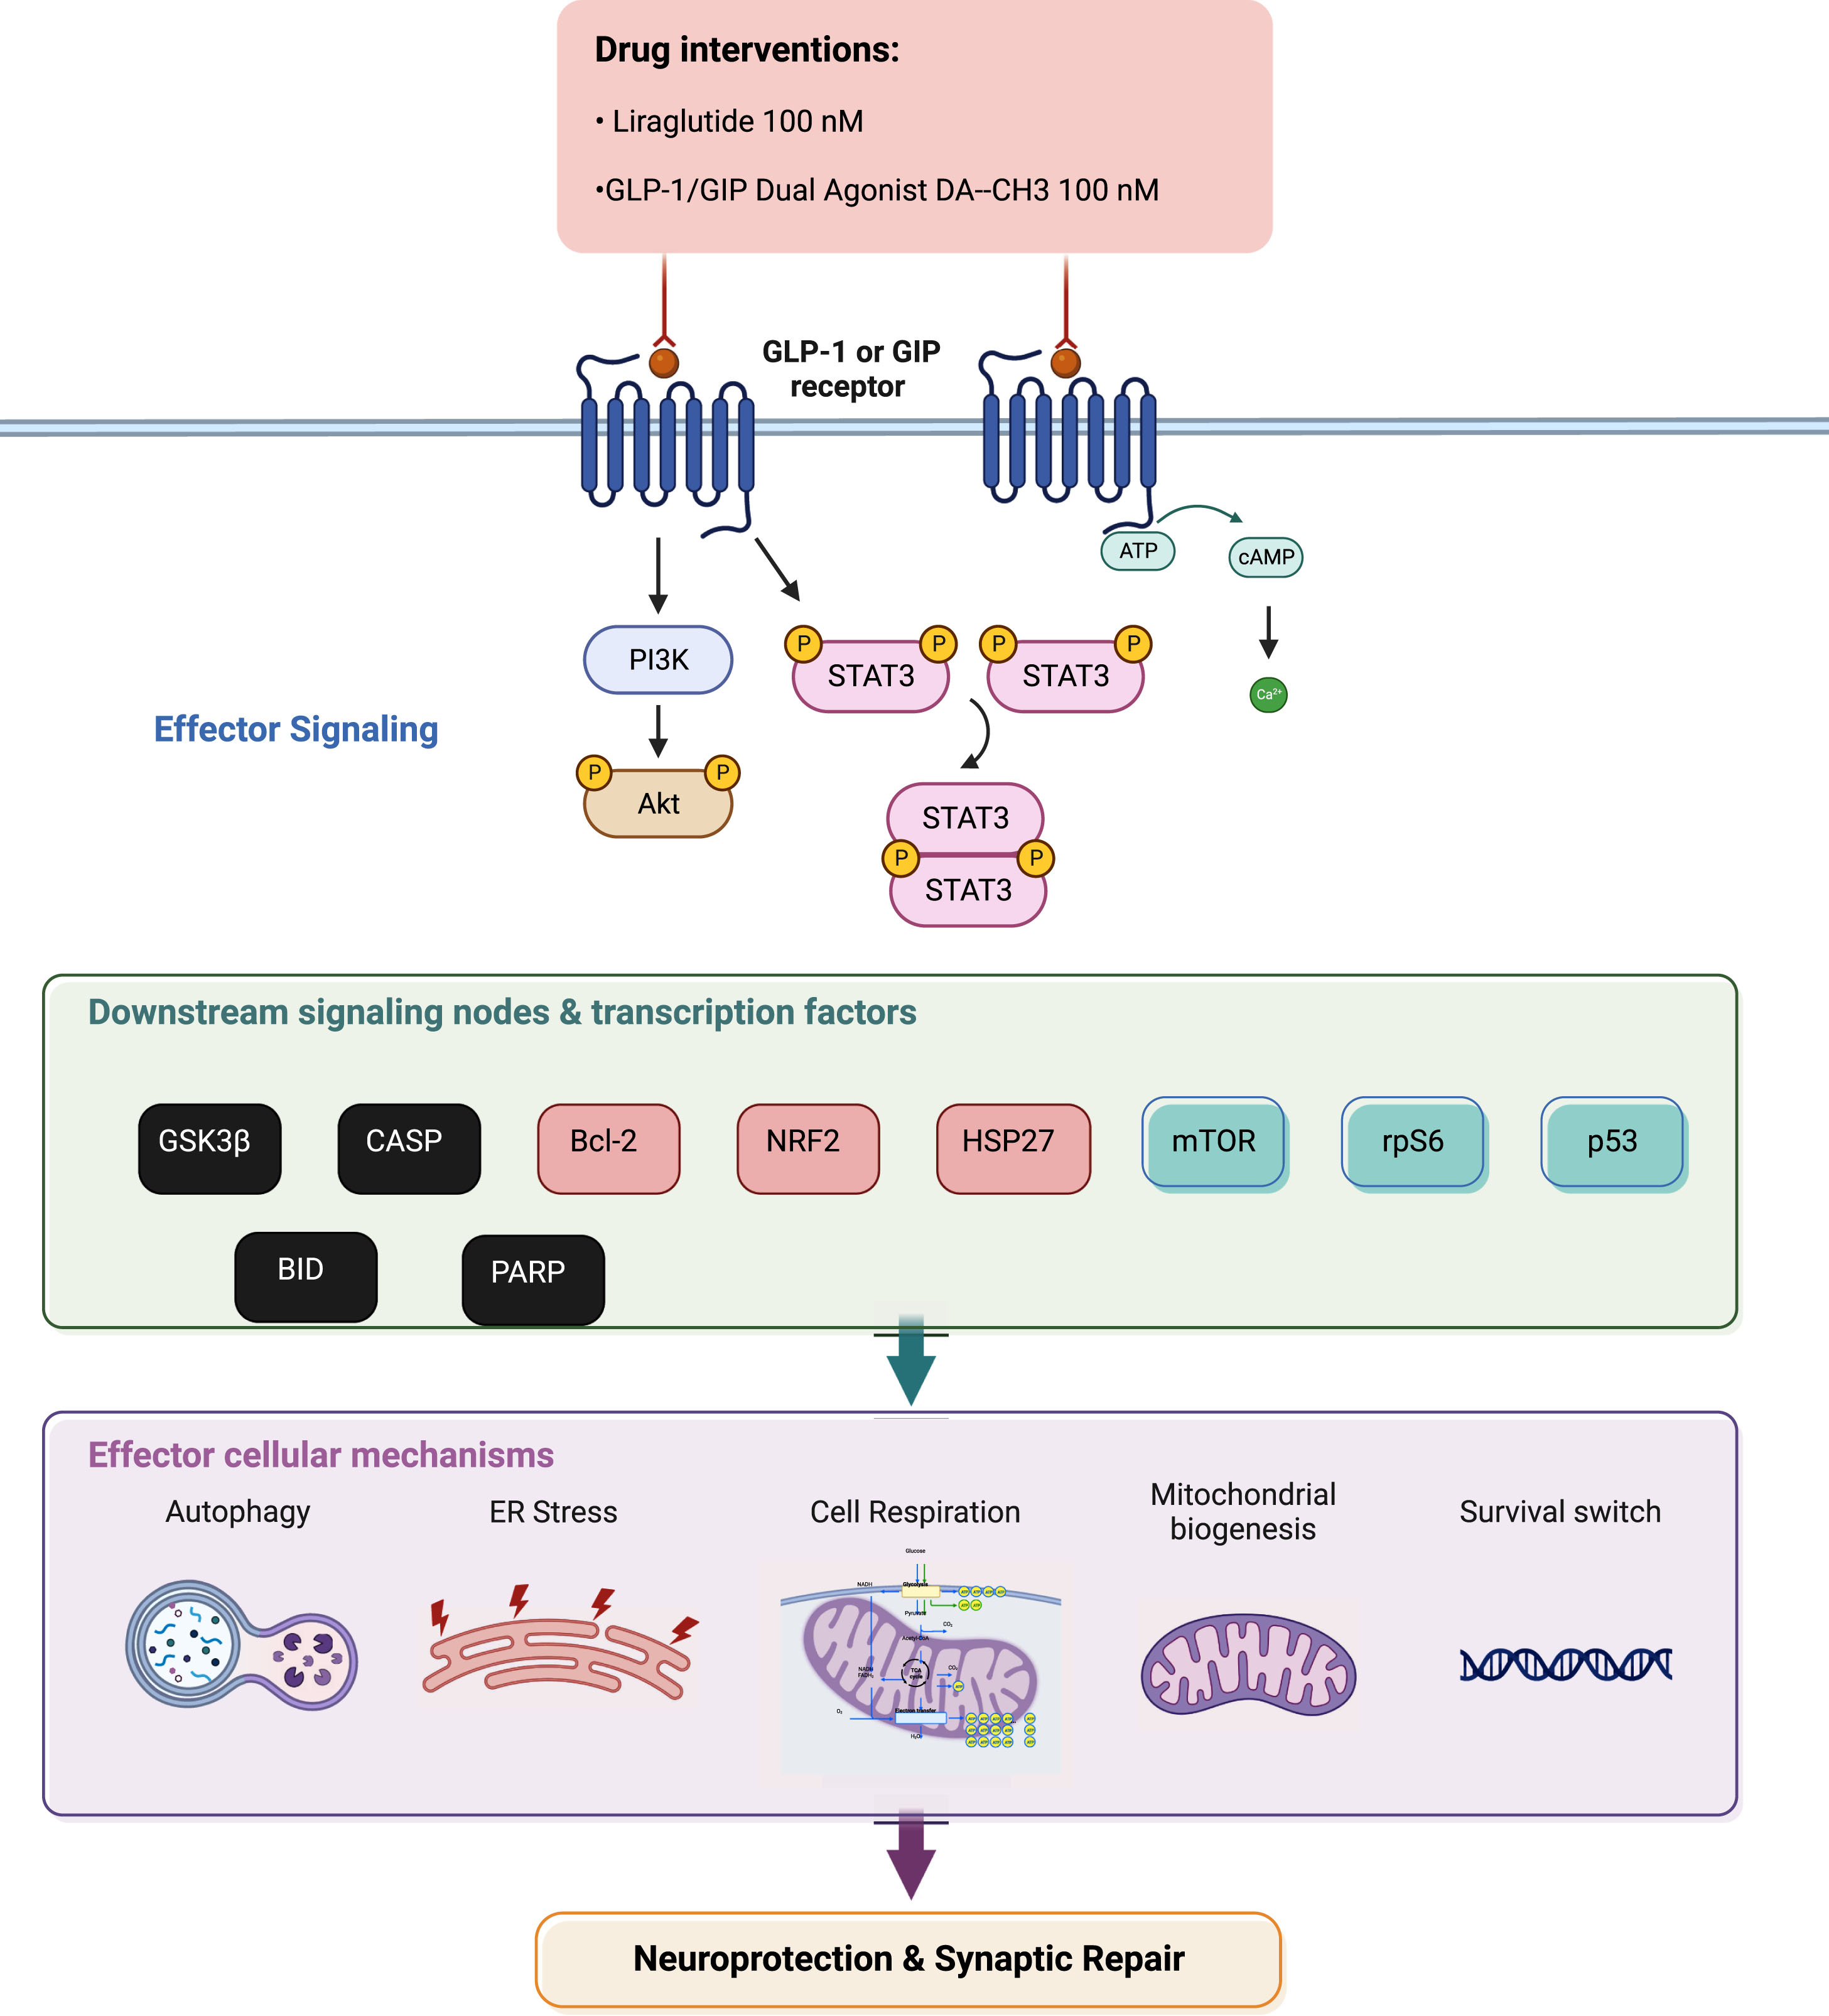 Summarizing illustration for incretin-driven effects and signaling observed upon chronic ER stress in dopaminergic-like neurons from the human LUHMES cell line. Liraglutide and GLP-1/GIP dual agonist modulate the effector Akt and Stat3 signaling to regulate the activity and expression patterns of downstream pro-apoptotic proteins (in black), pro-survival factors (in light red) and critical signaling pathways (in green). In turn, they restore essential intracellular processes to ultimately elicit neuroprotection and synaptic repair. For abbreviations, please refer to the main text.